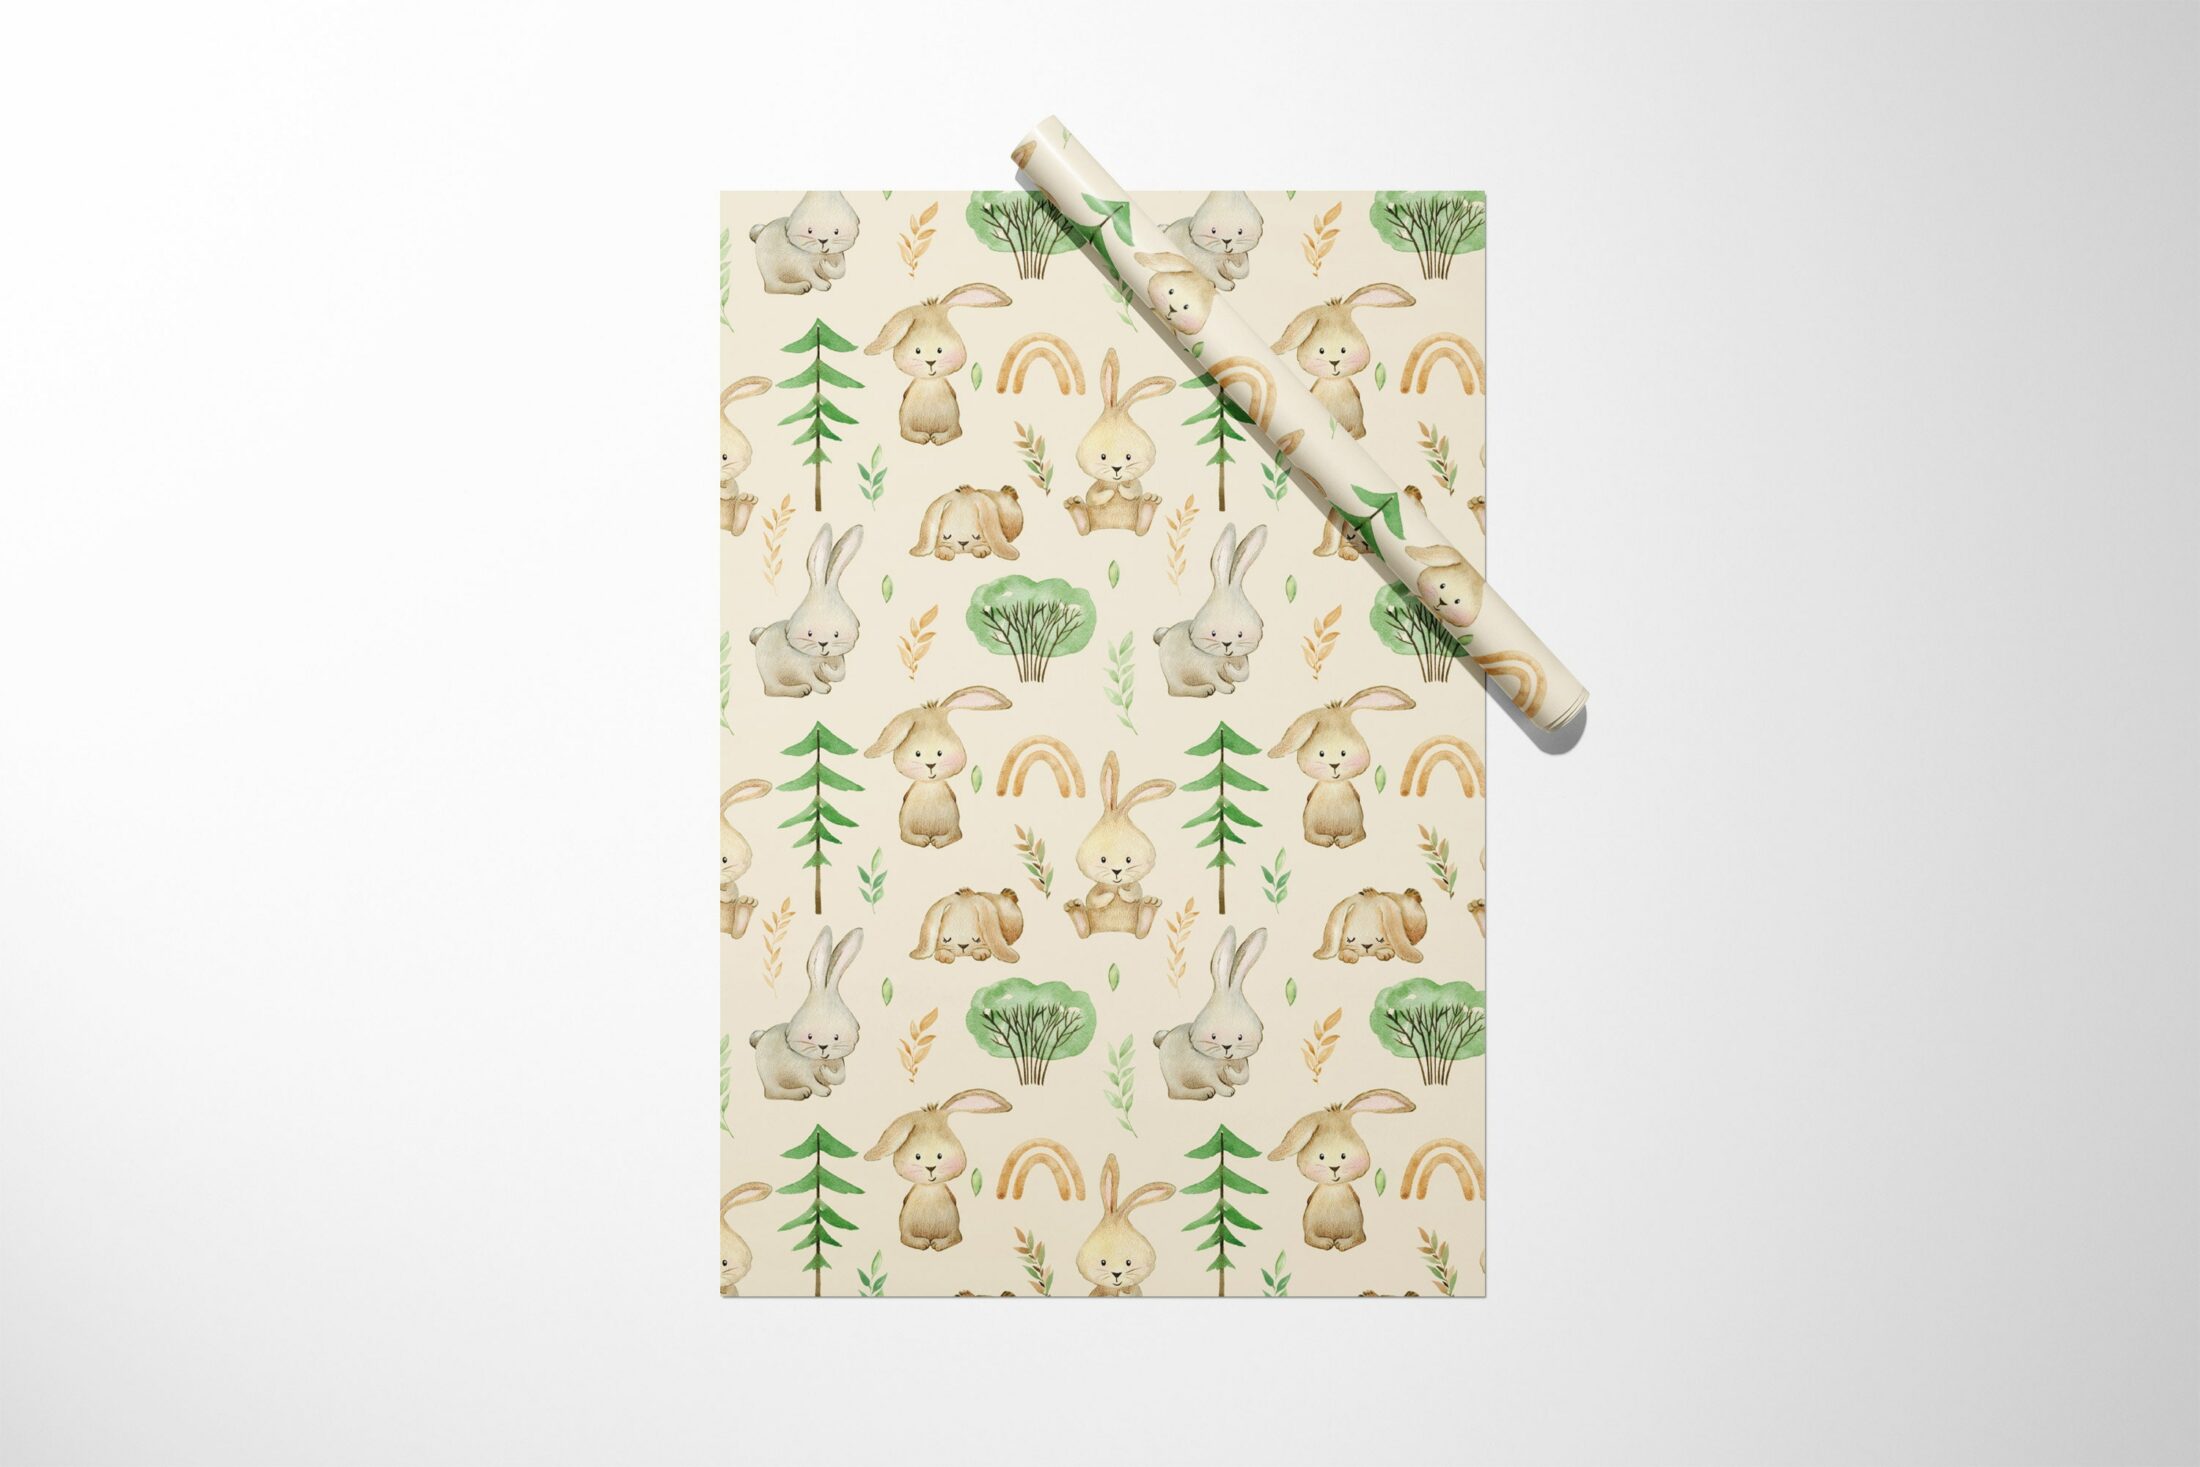 Bunny and Forest Wrapping Paper featuring a tree and animals.